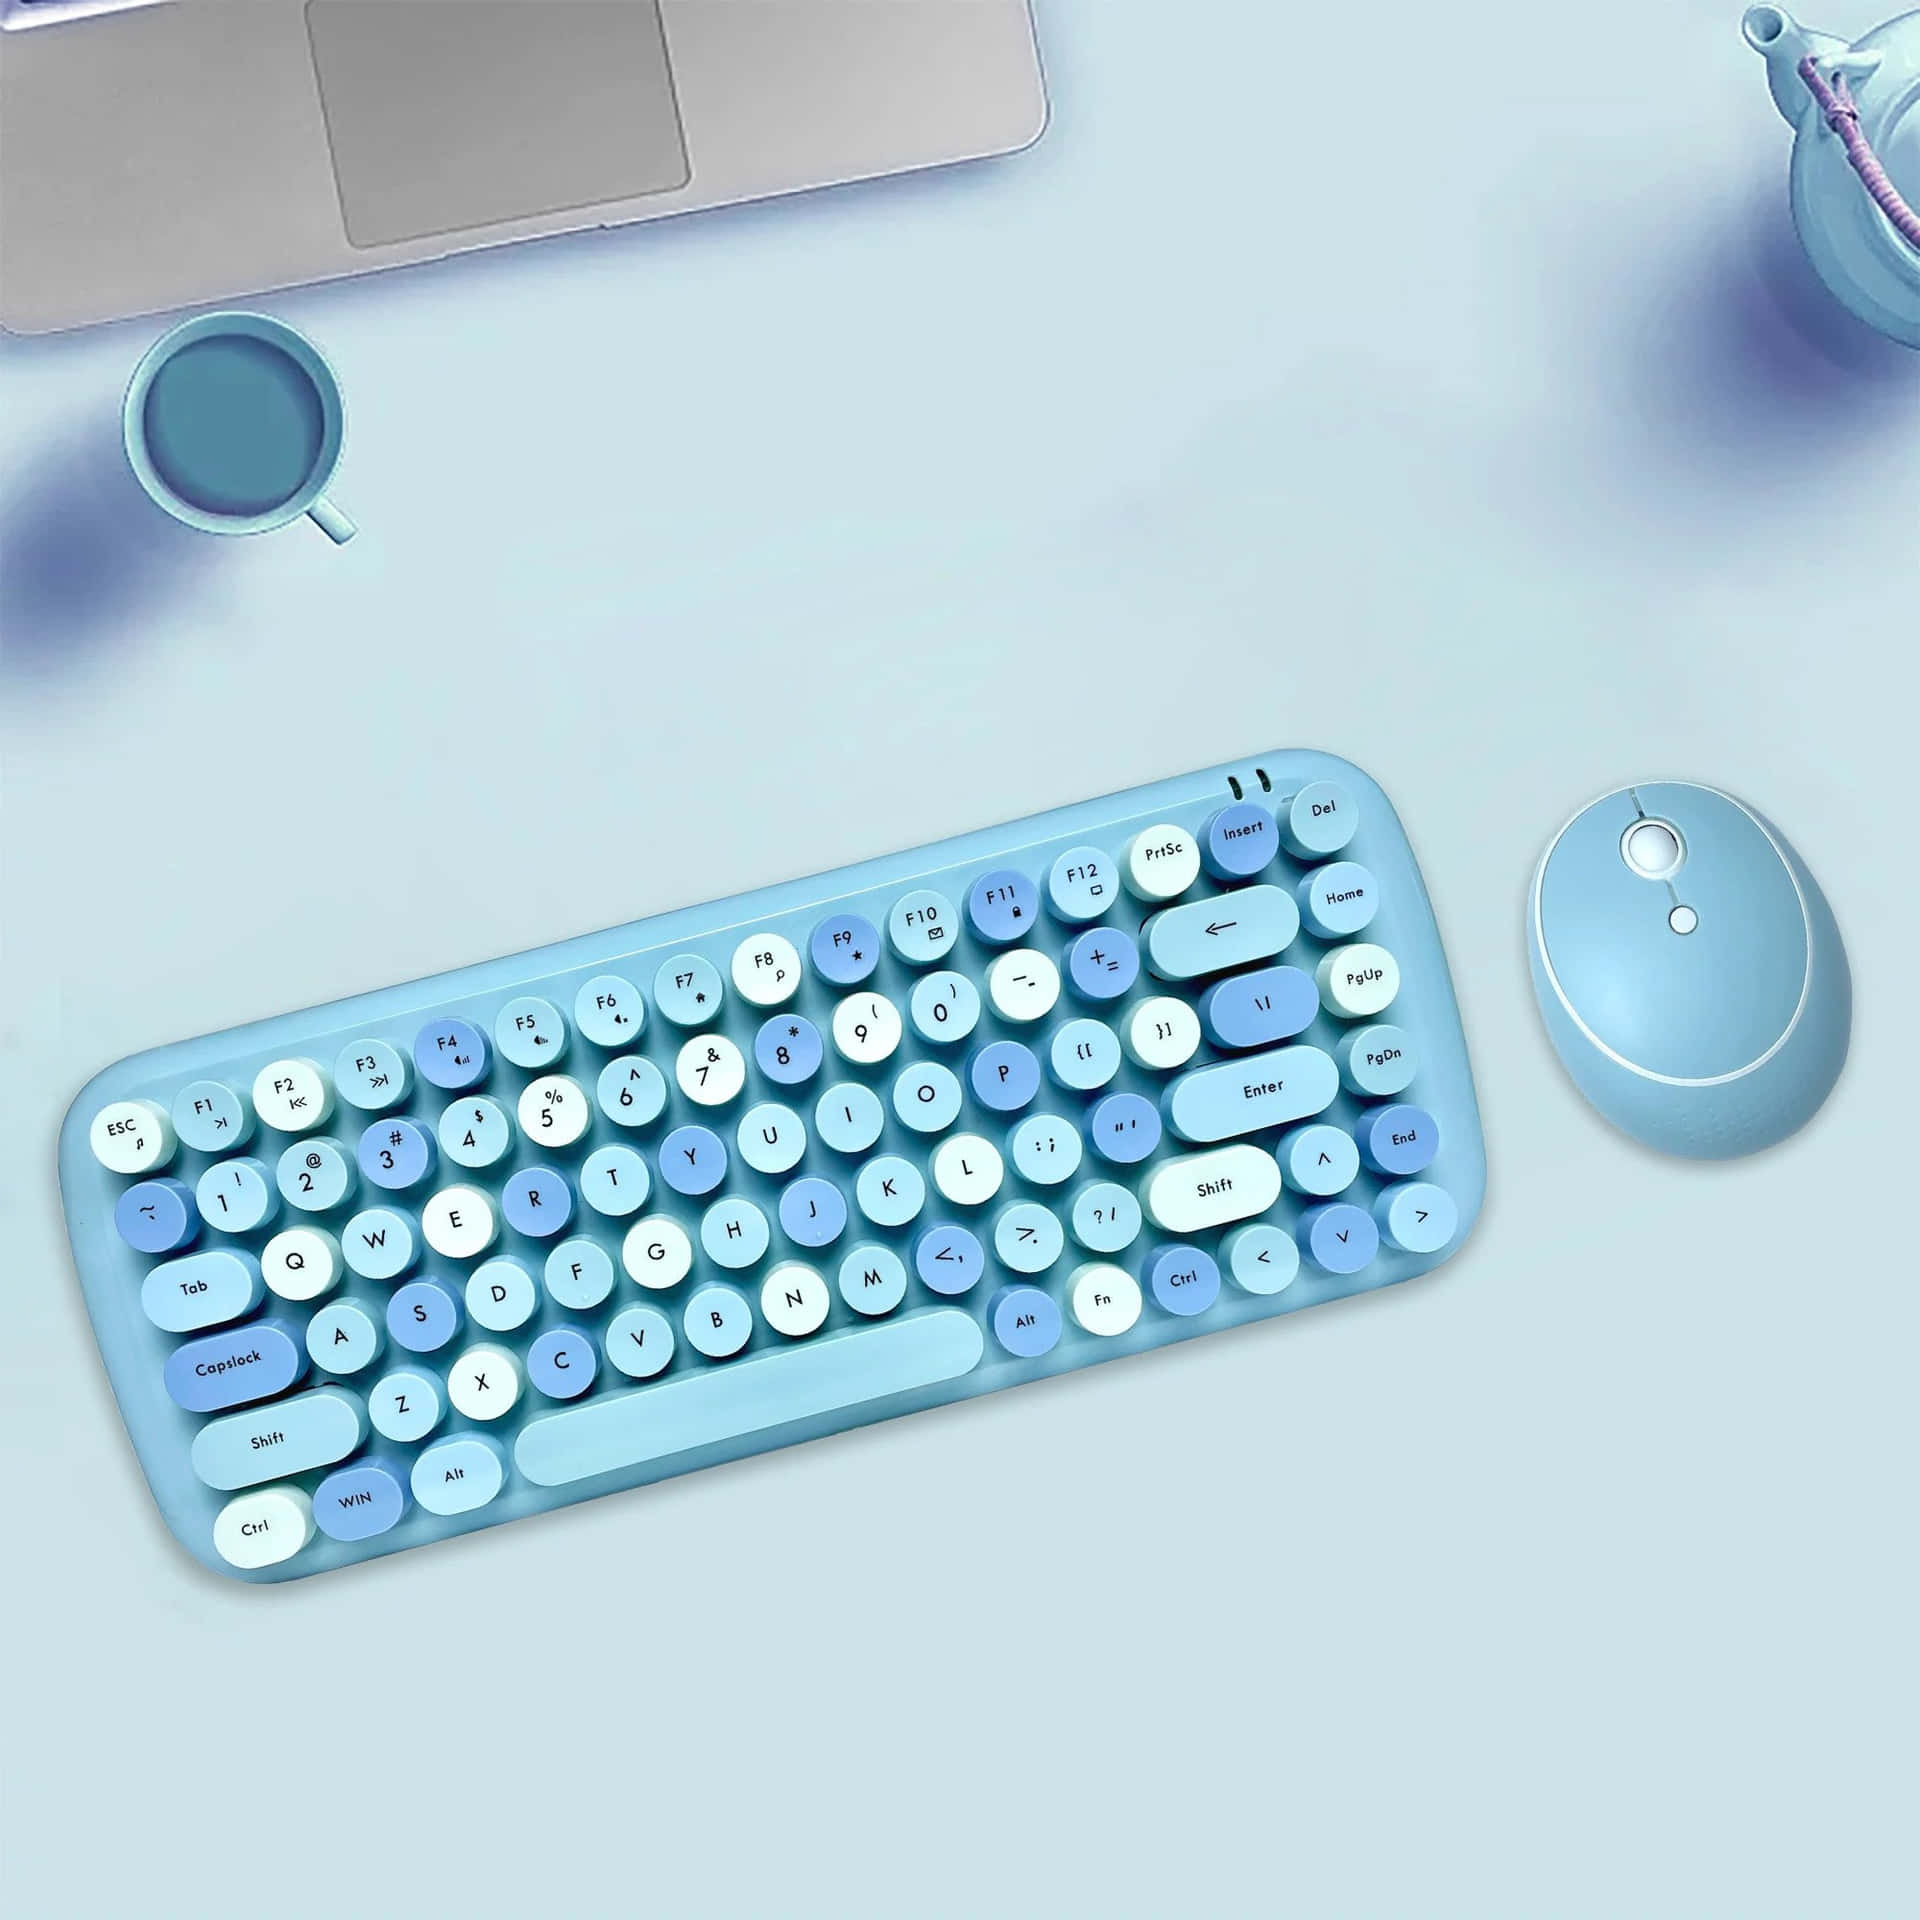 A Blue Keyboard And Mouse On A Table